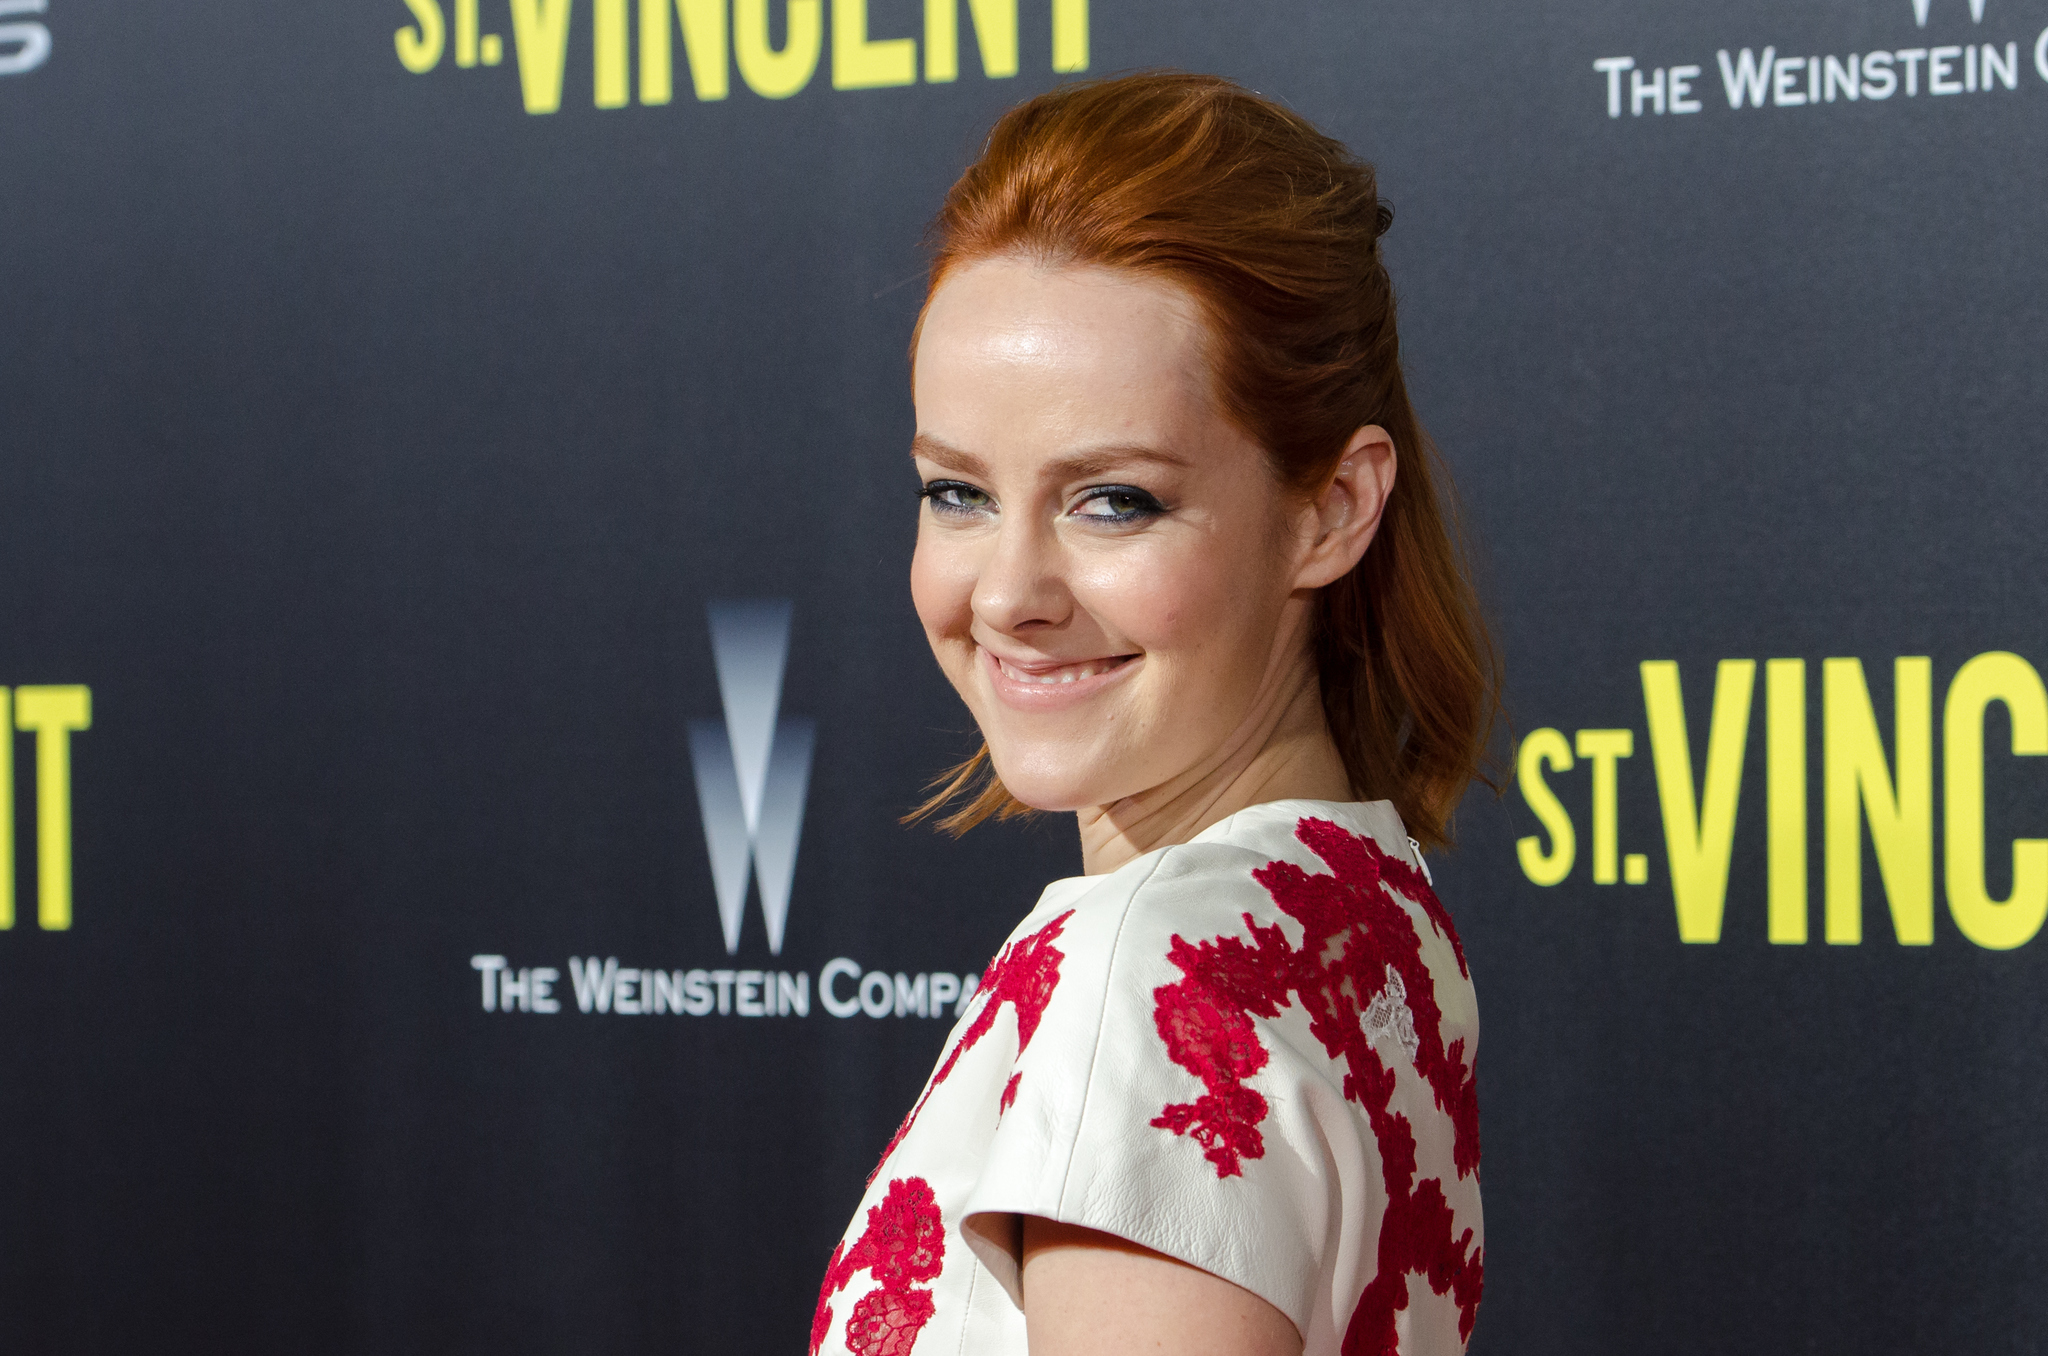 Jena Malone at event of St. Vincent (2014)